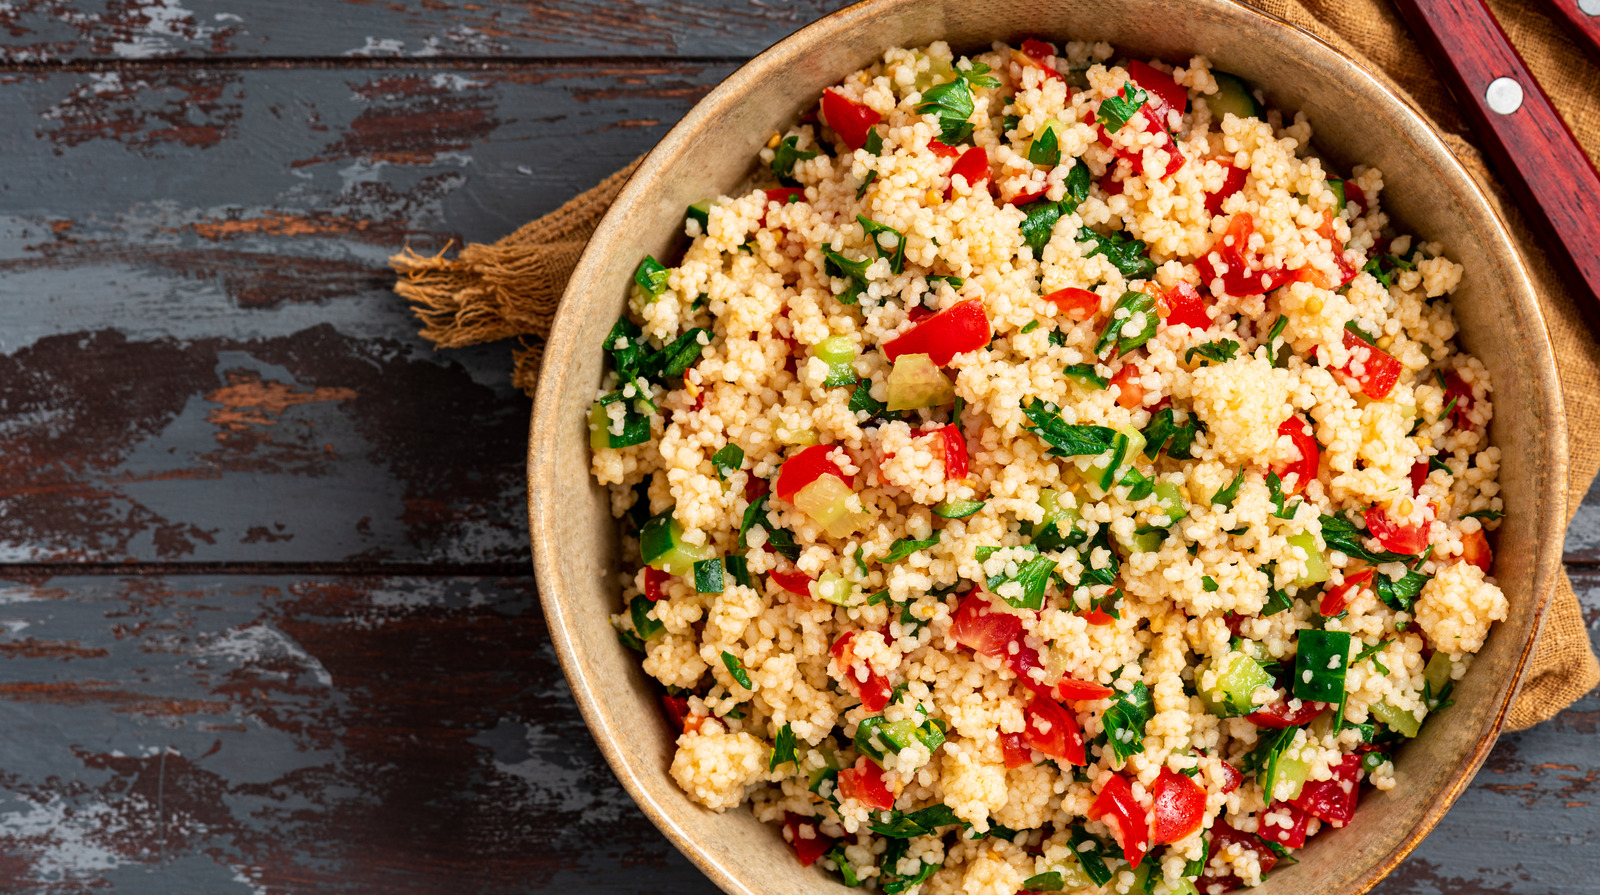 Why Fresh Herbs Are Essential For The Best Tabbouleh